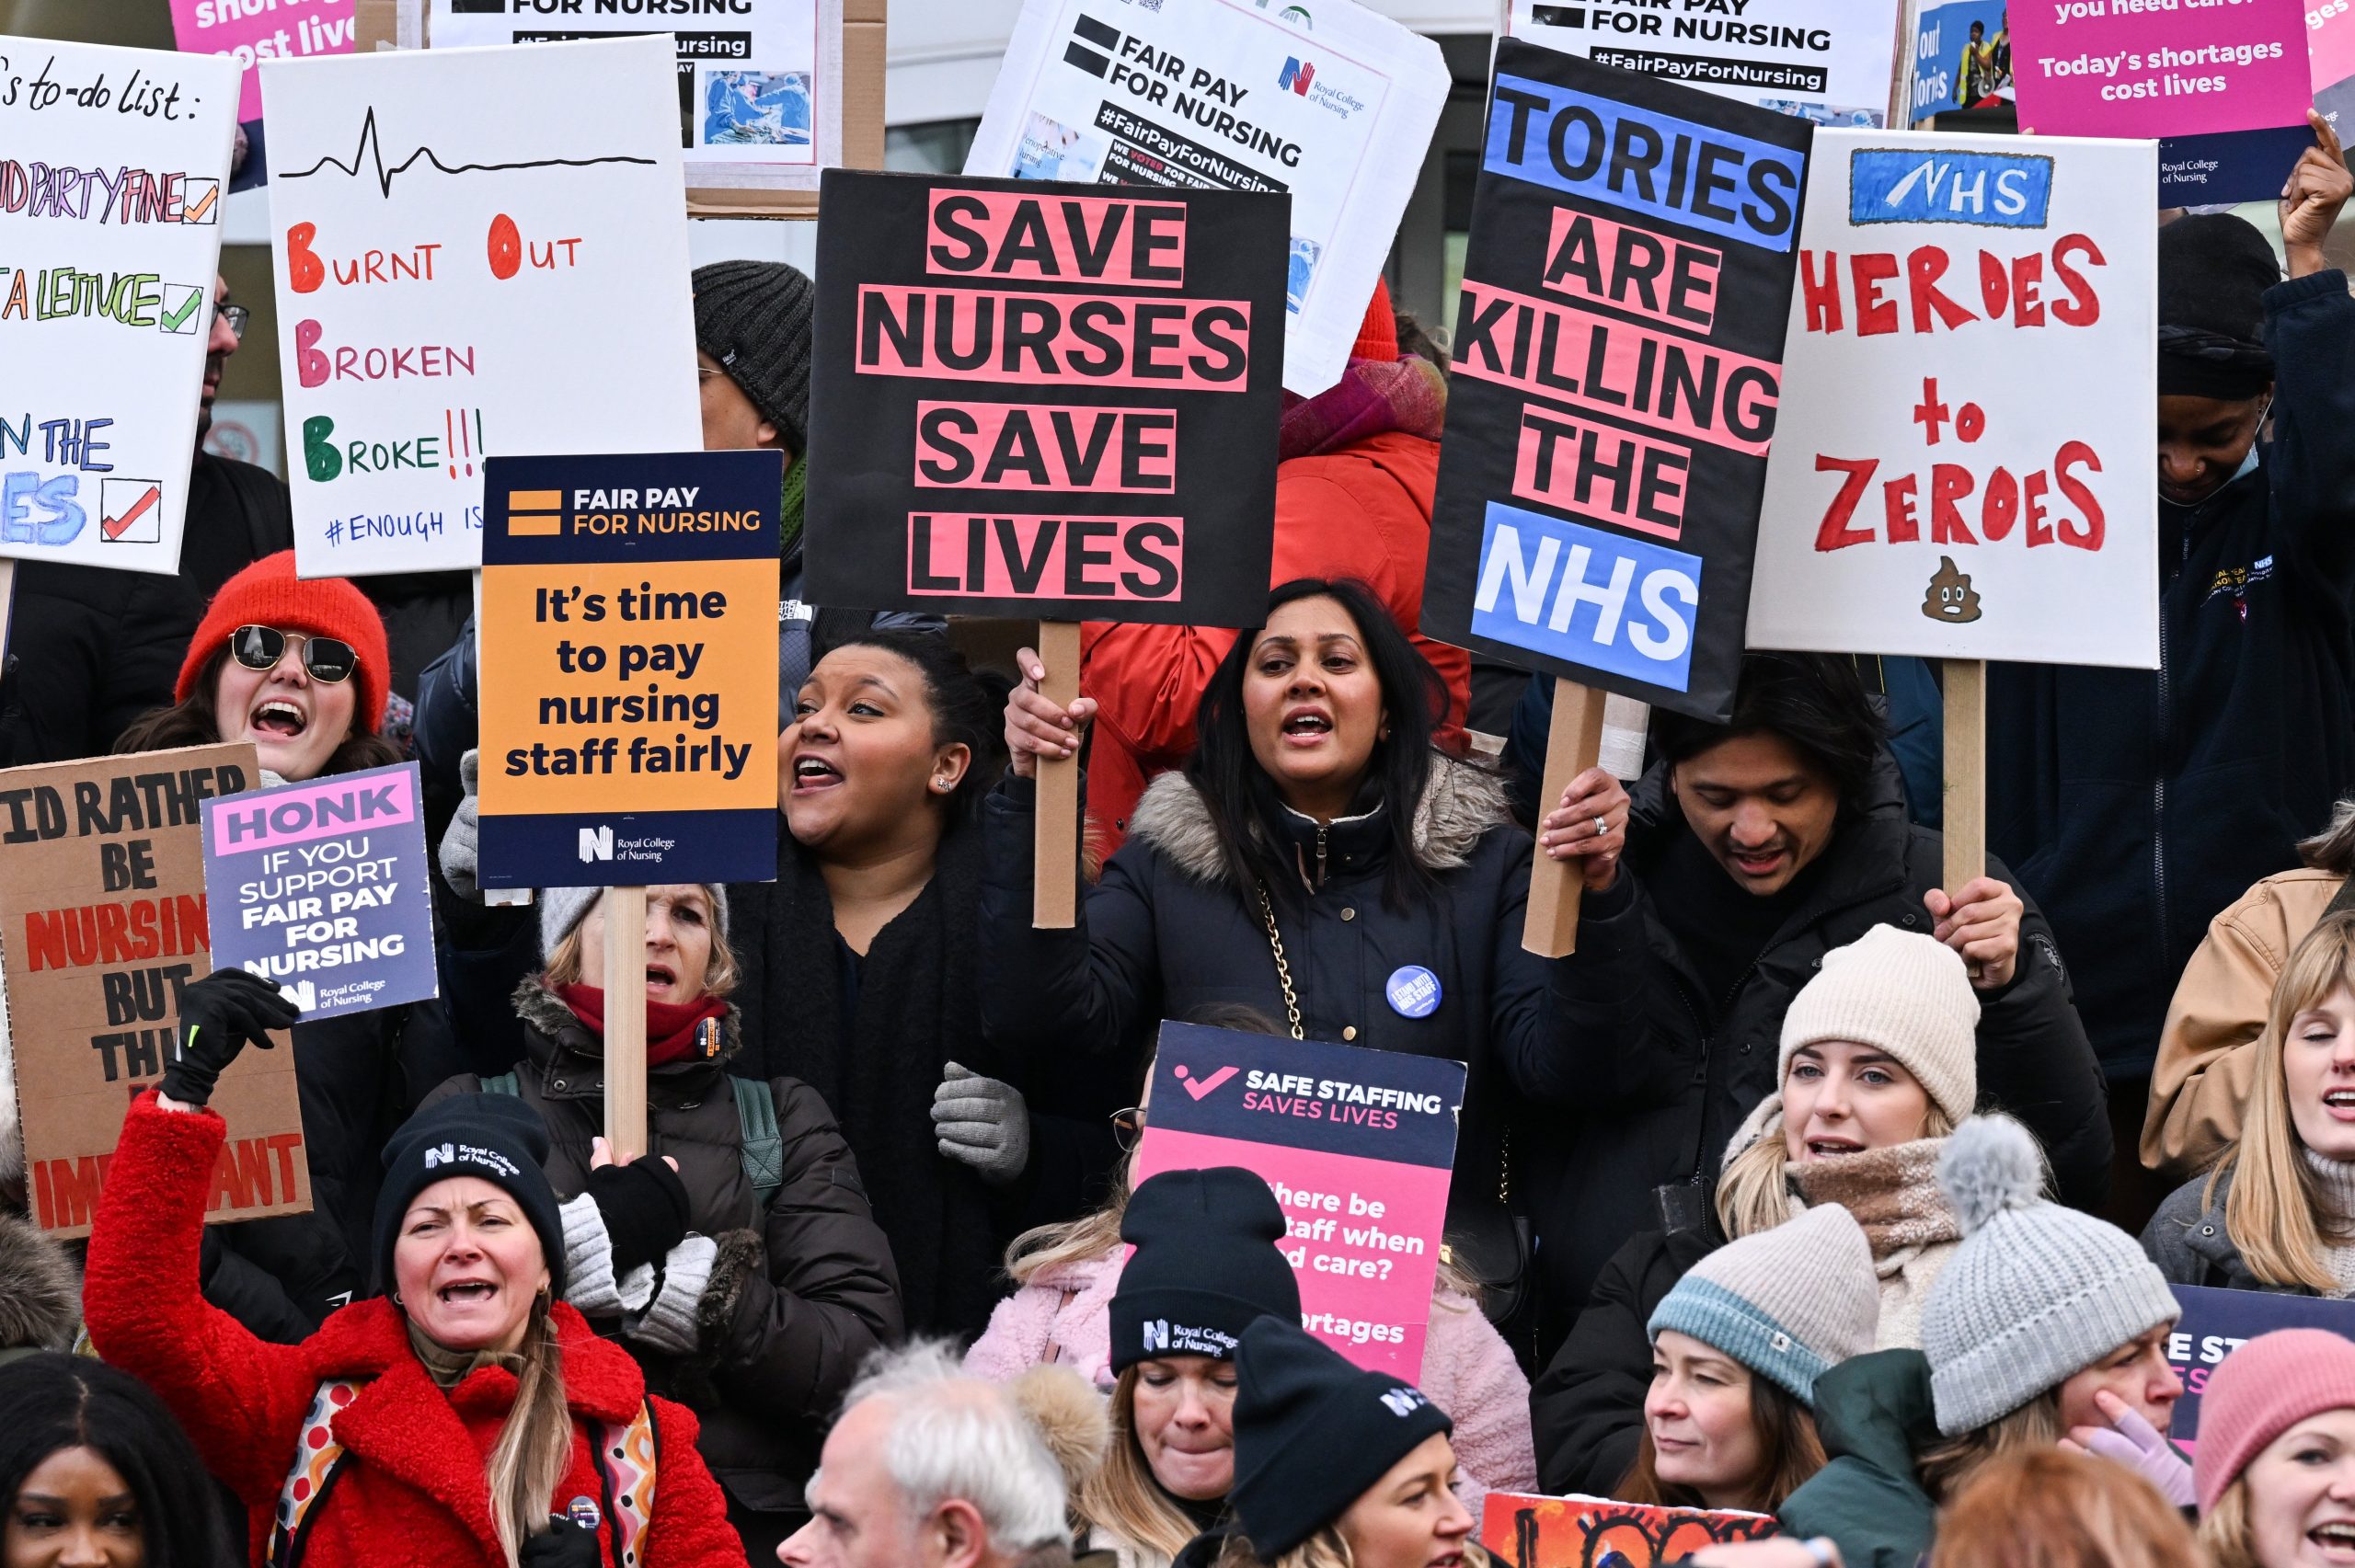 women holding picket signs with lettering such as 'save nurses save lives' another says 'tories are killing the NHS'